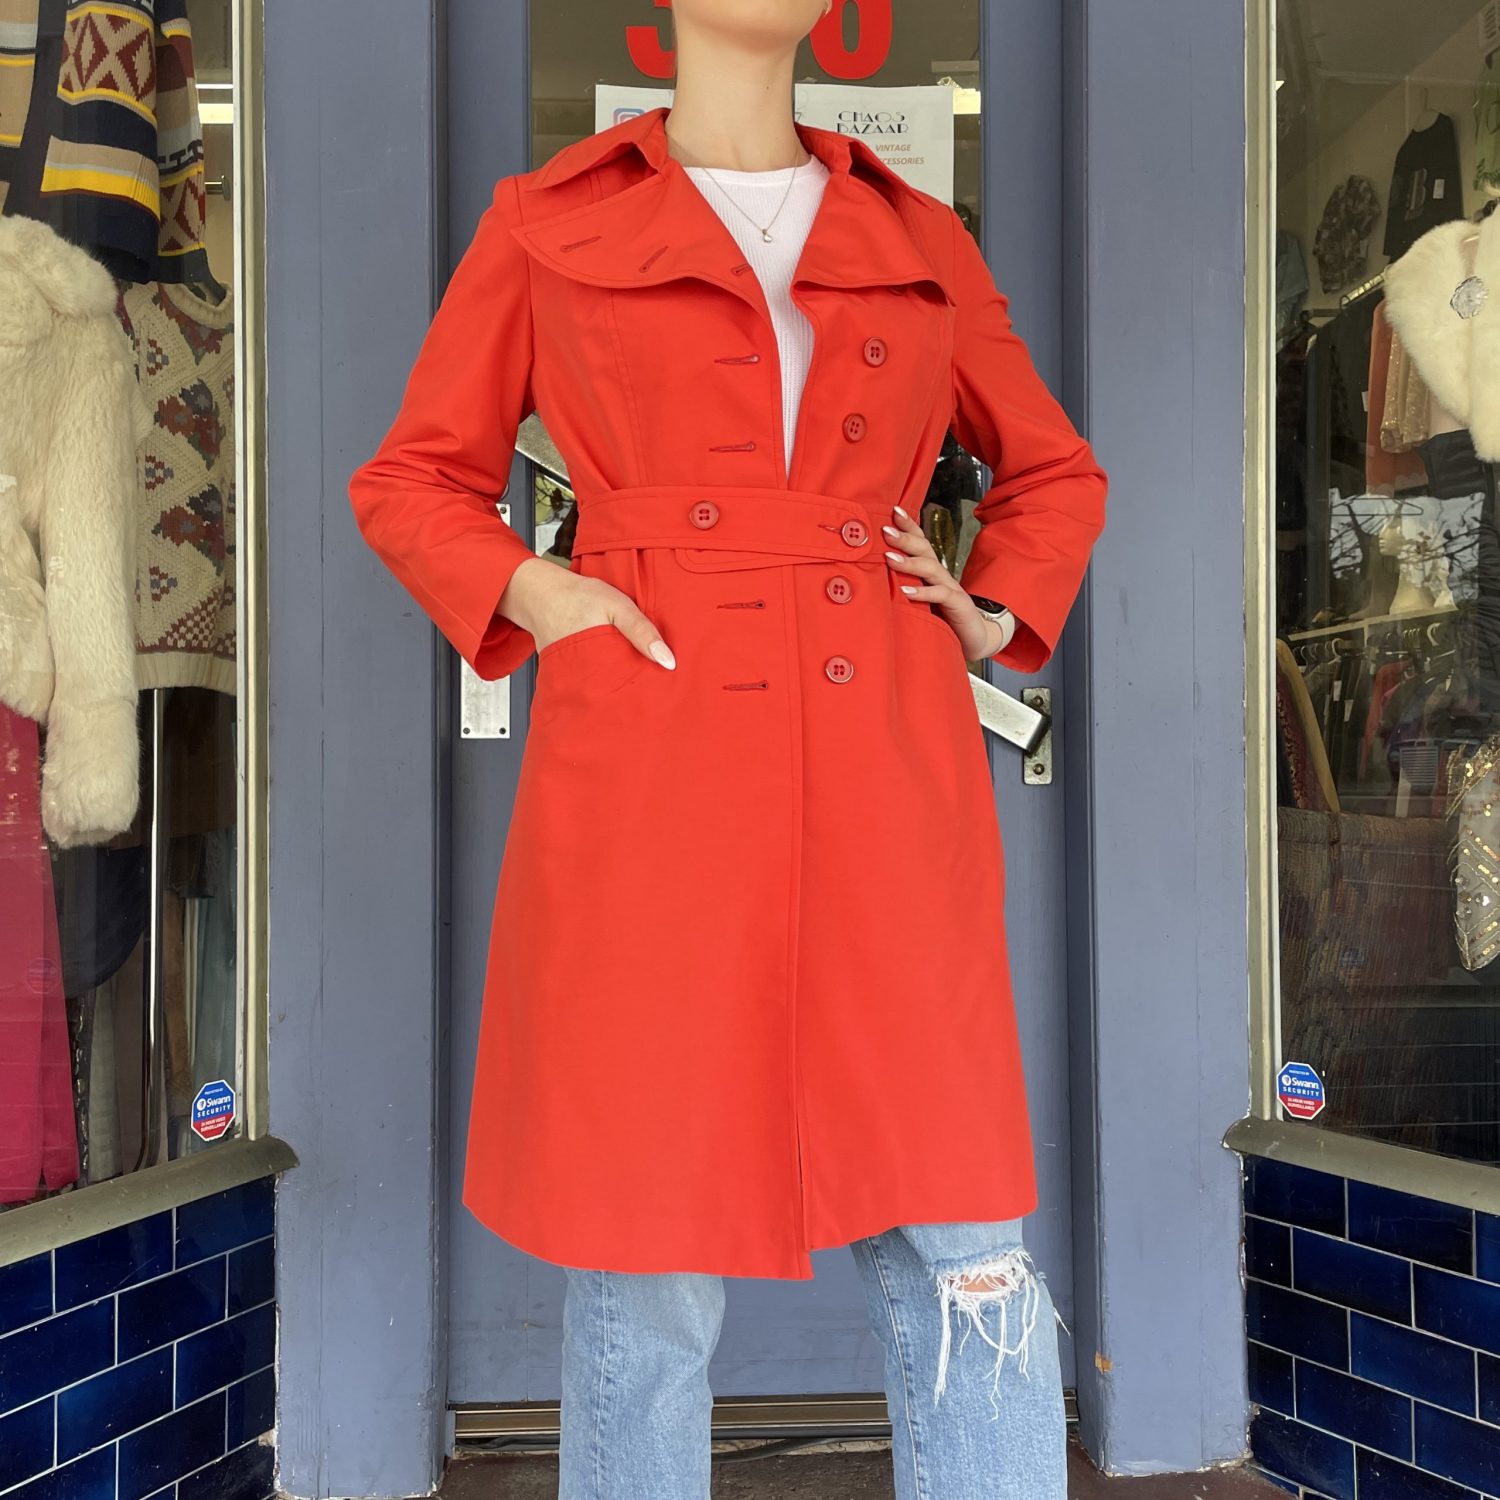 Vintage Bright Red Long Trench-Coat with Belt | Chaos Bazaar Vintage